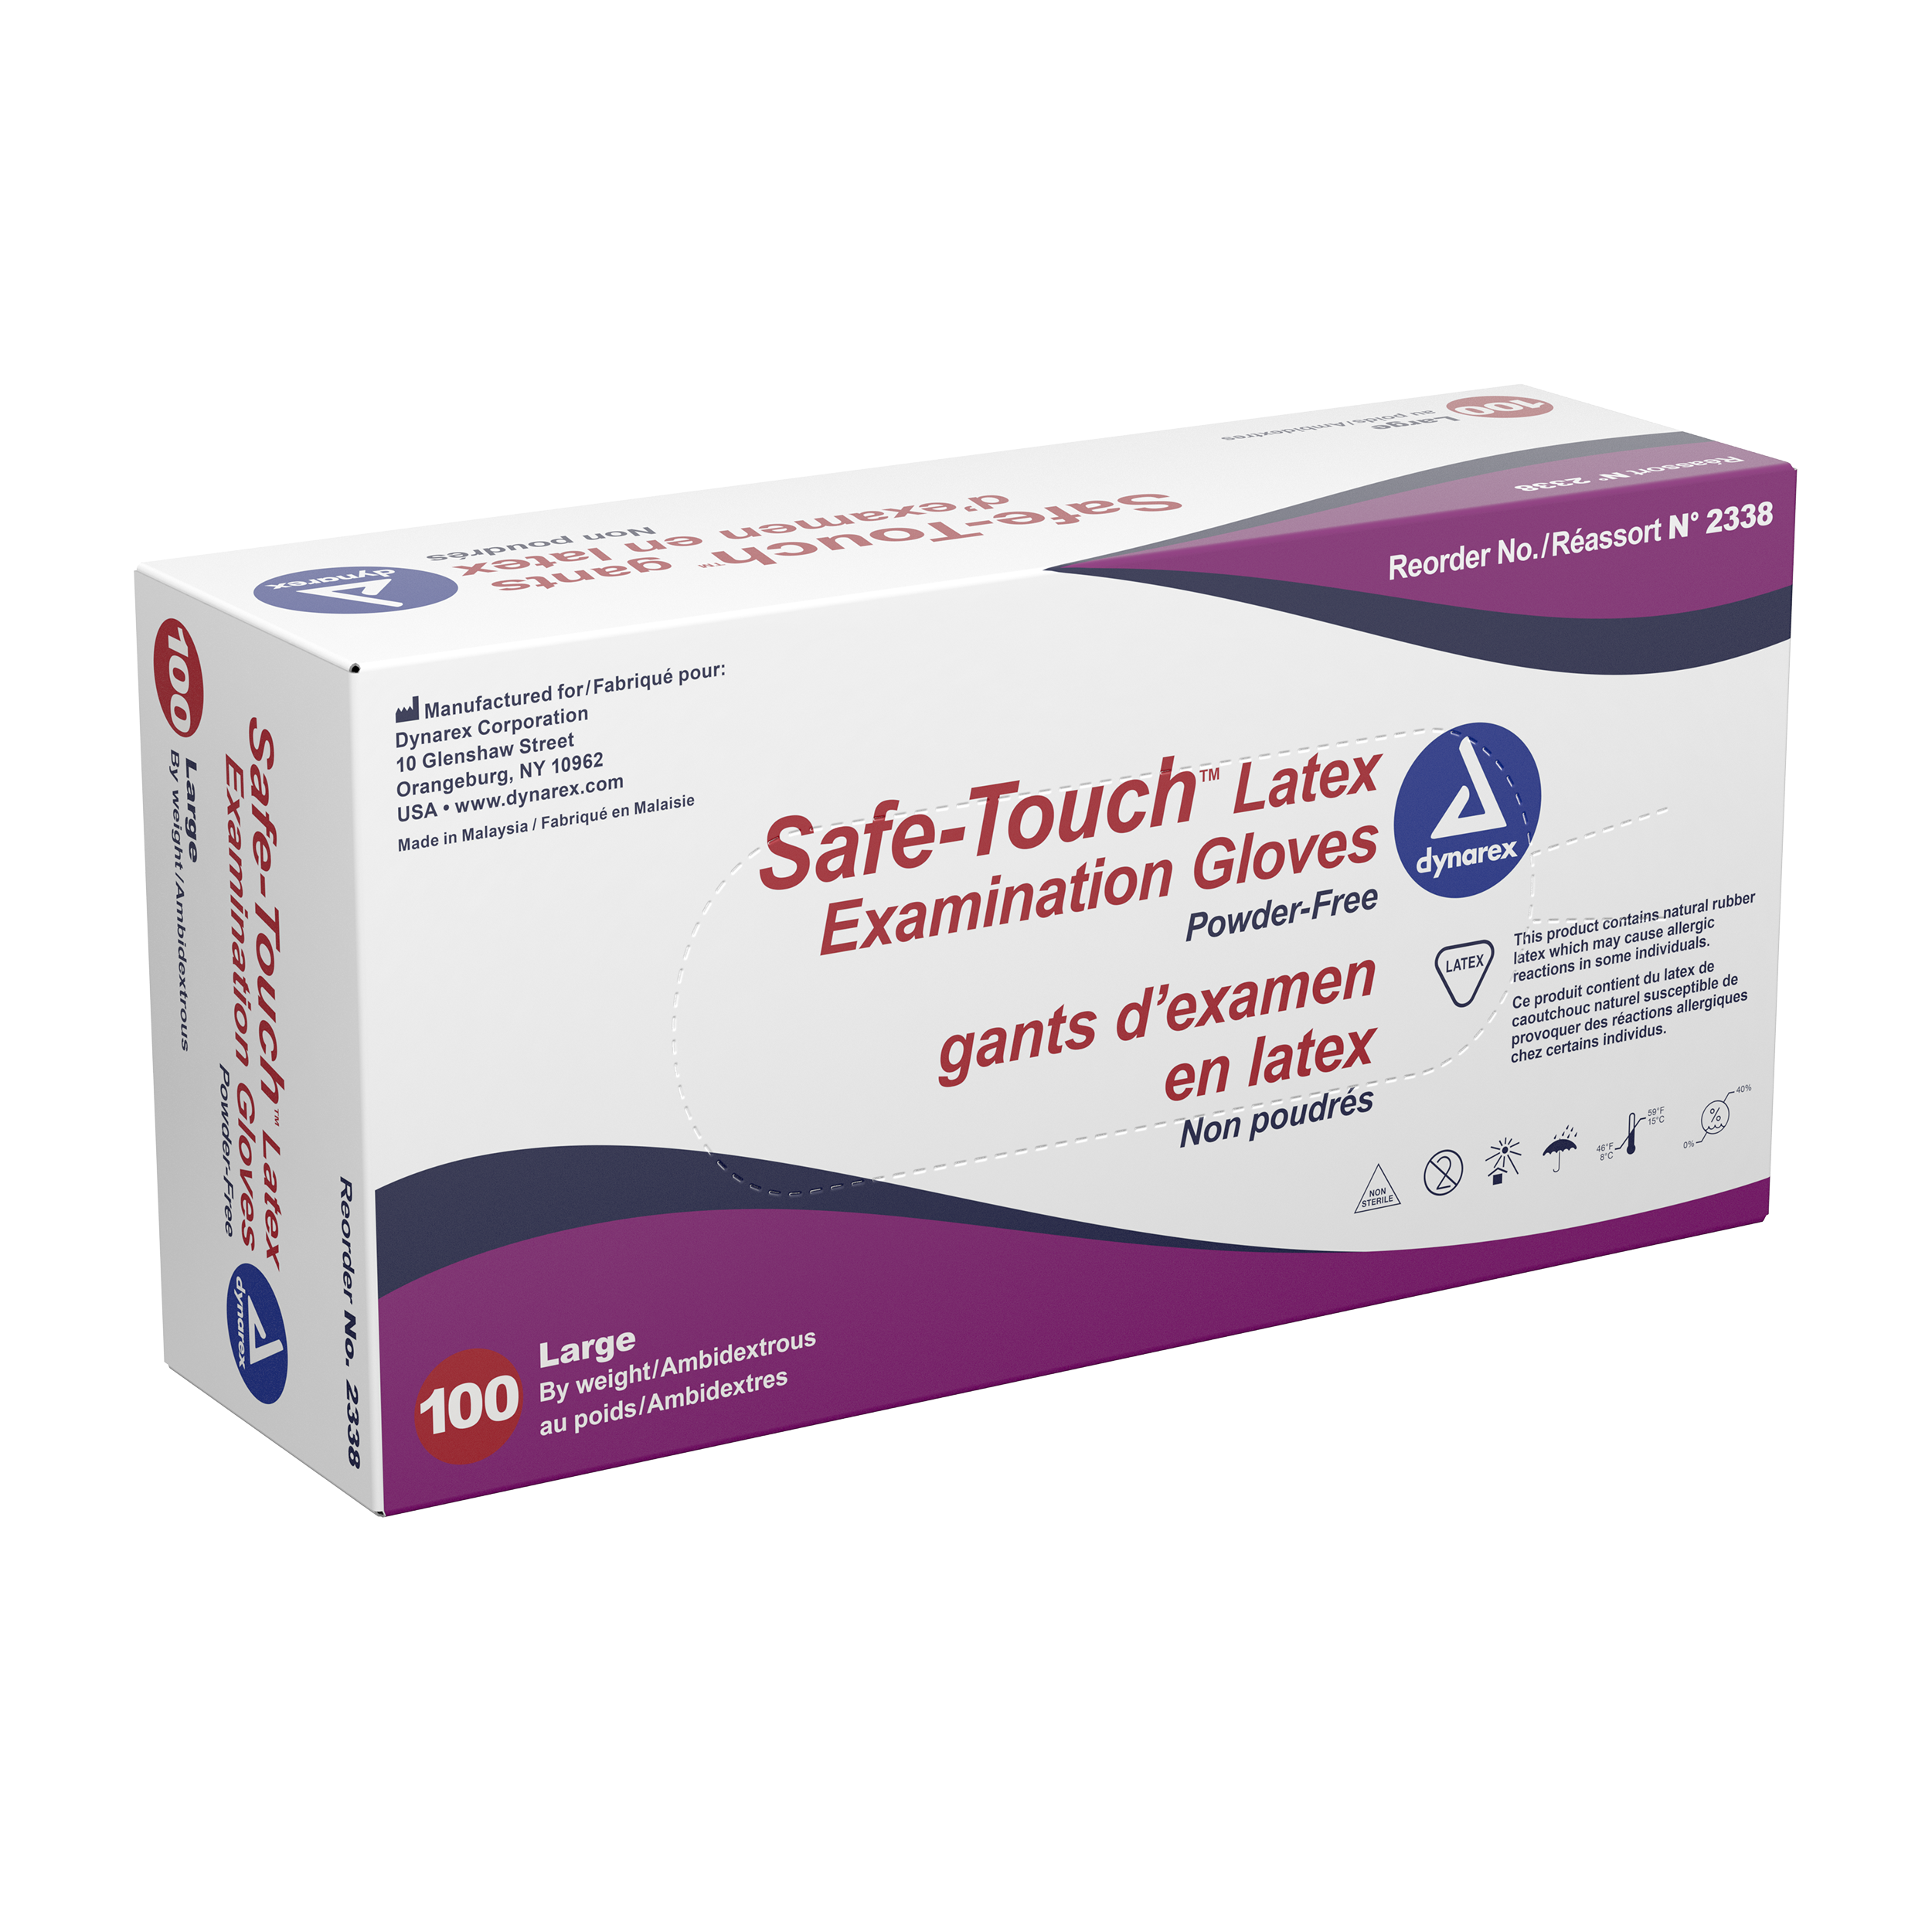 Safe-Touch Latex Exam Gloves- Powder-Free - L